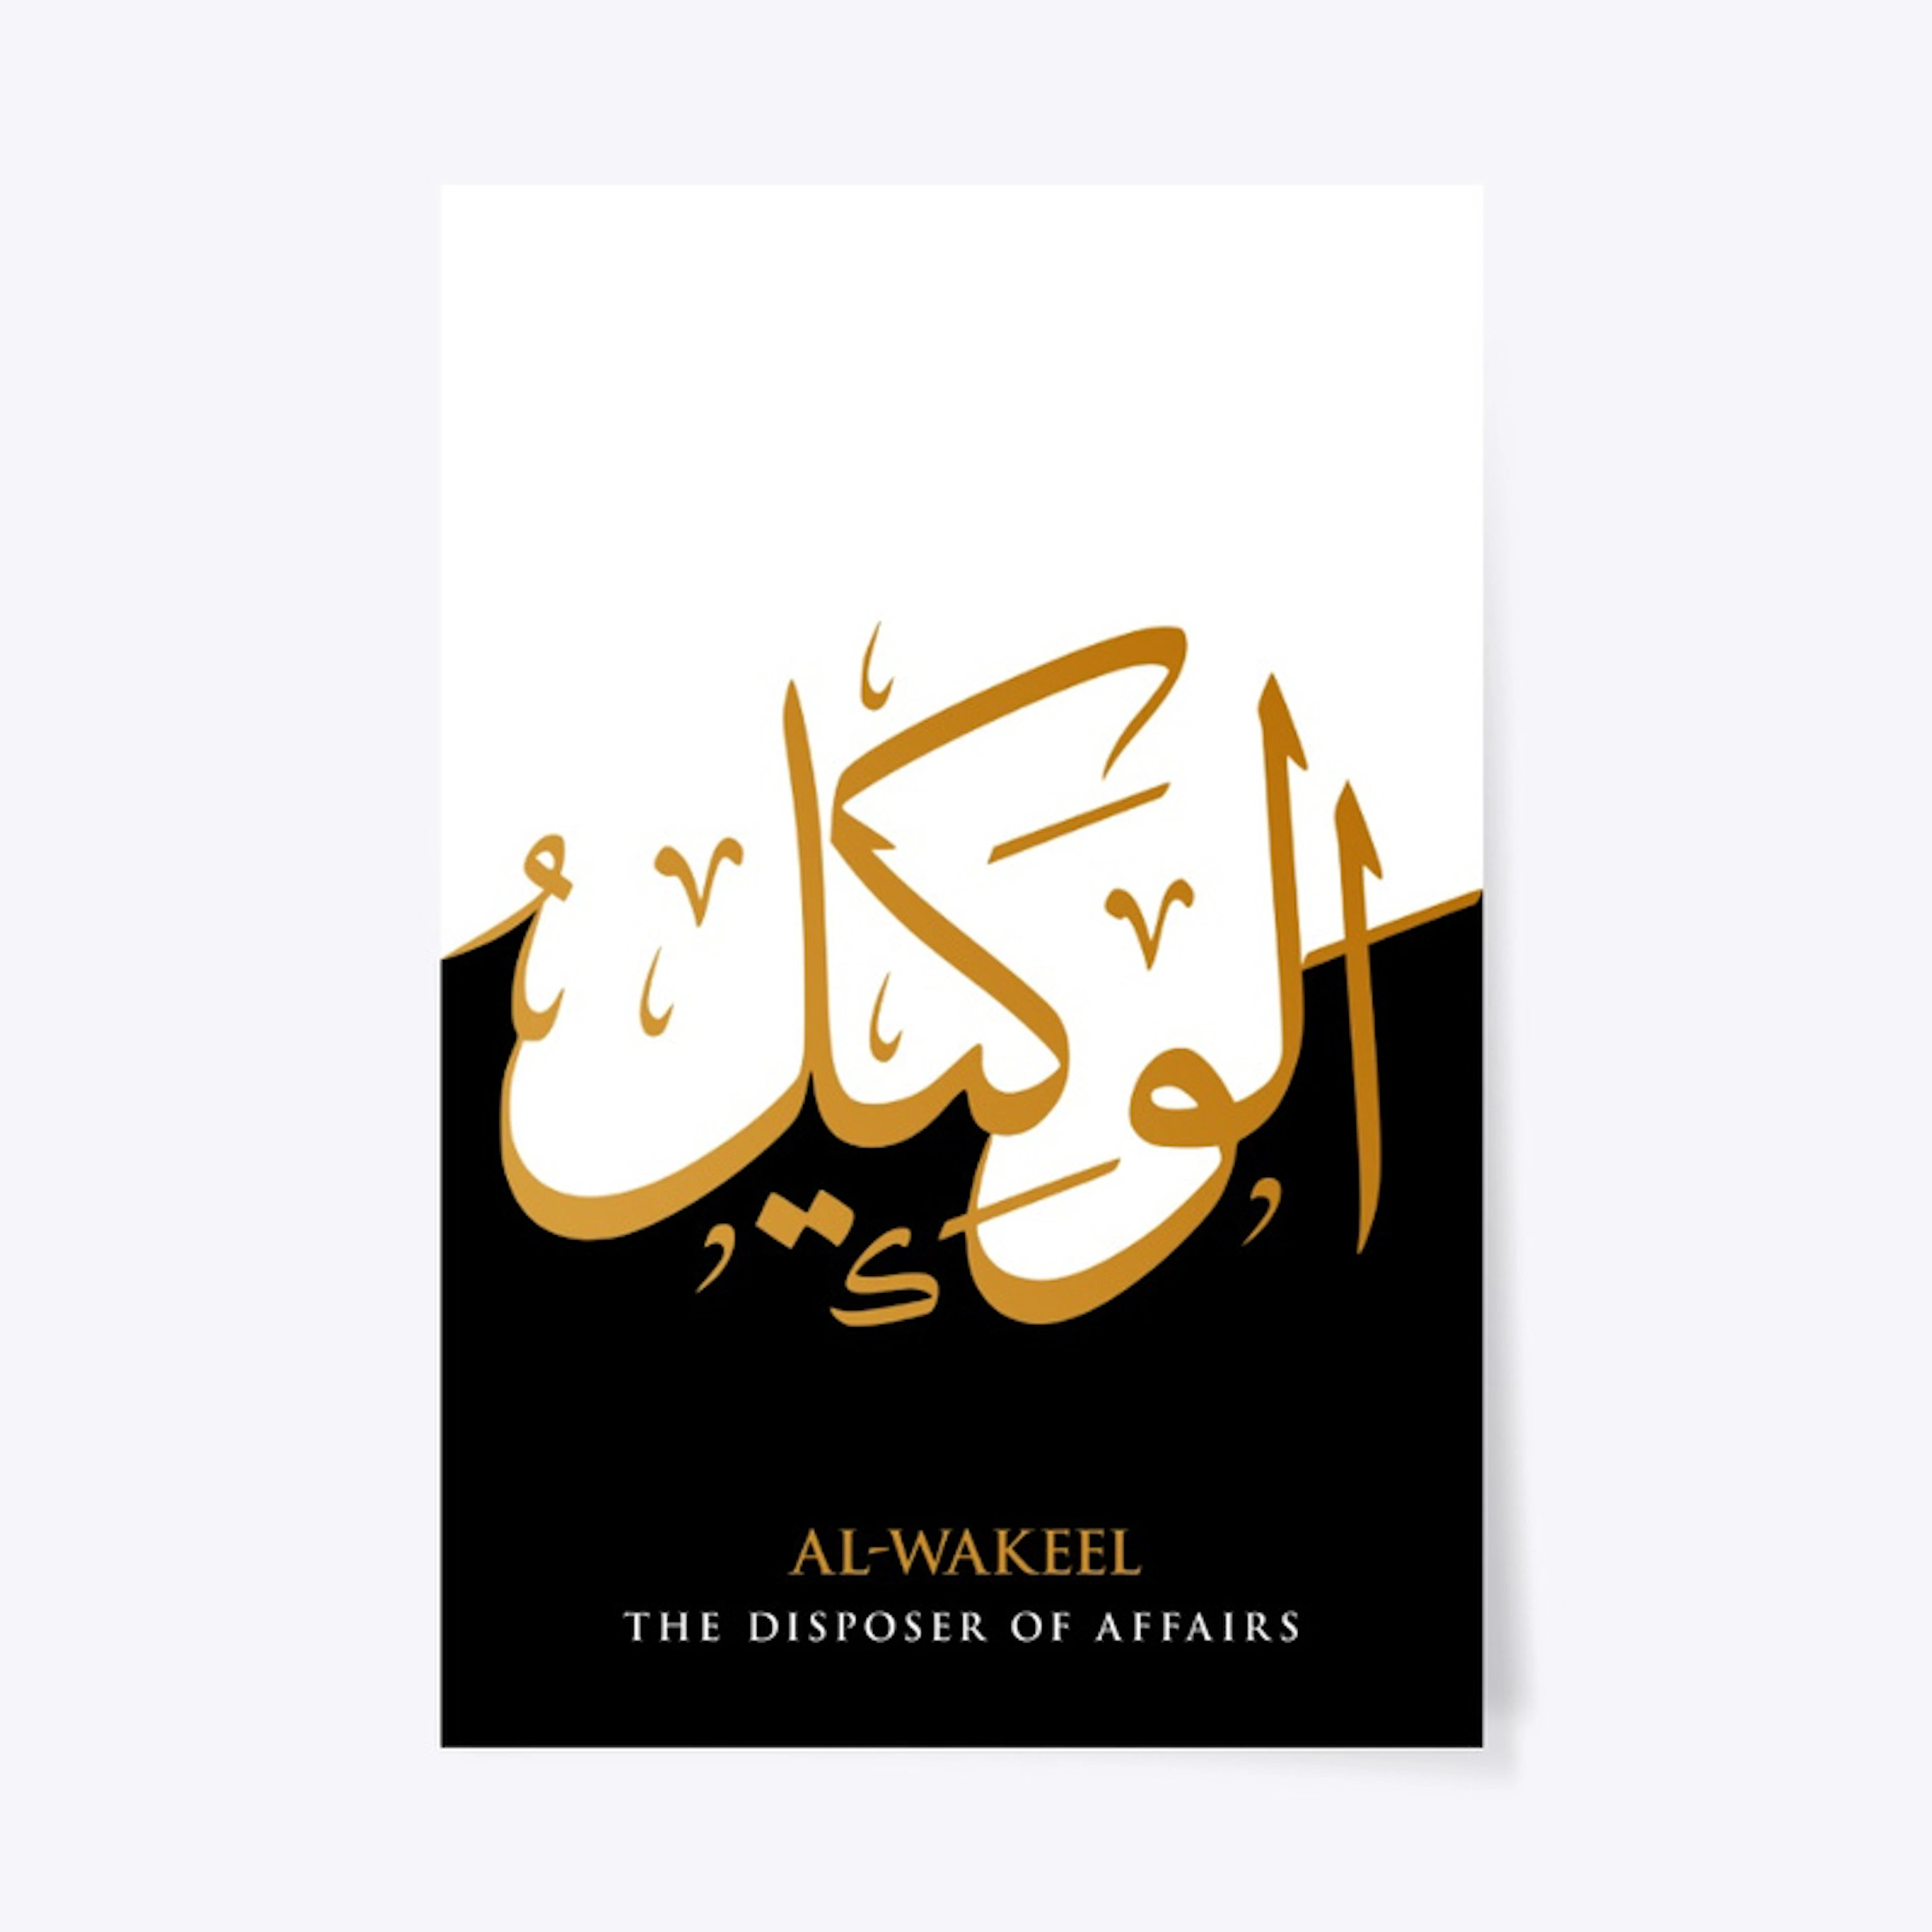 AL-WAKEEL : THE DISPOSER OF AFFAIRS